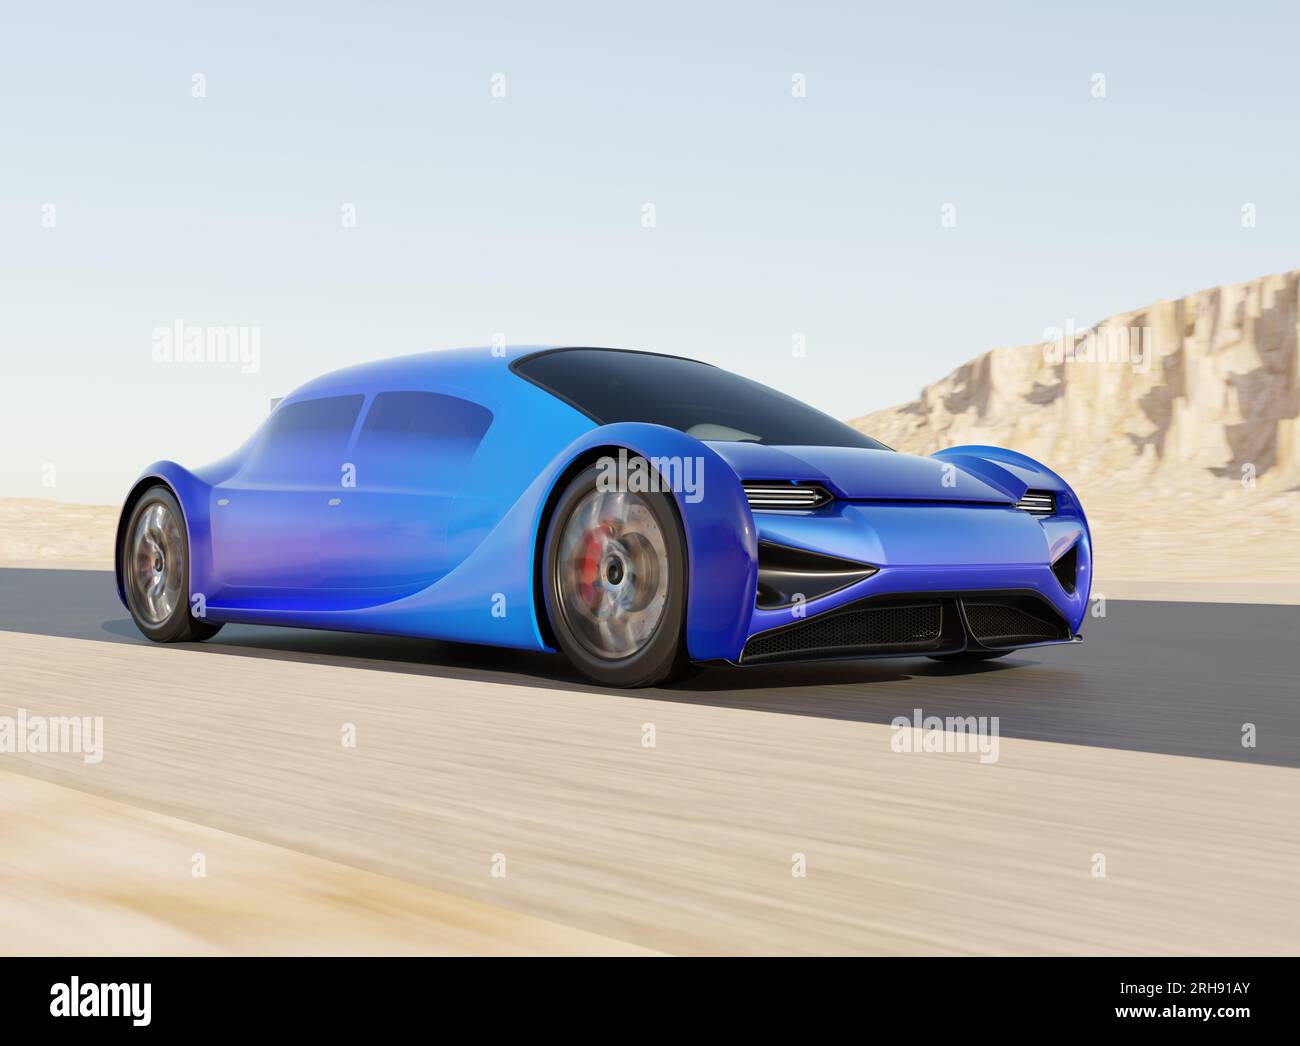 Futuristic Blue Electric Car driving on road with desert background. Generic design, 3D rendering image. Stock Photo